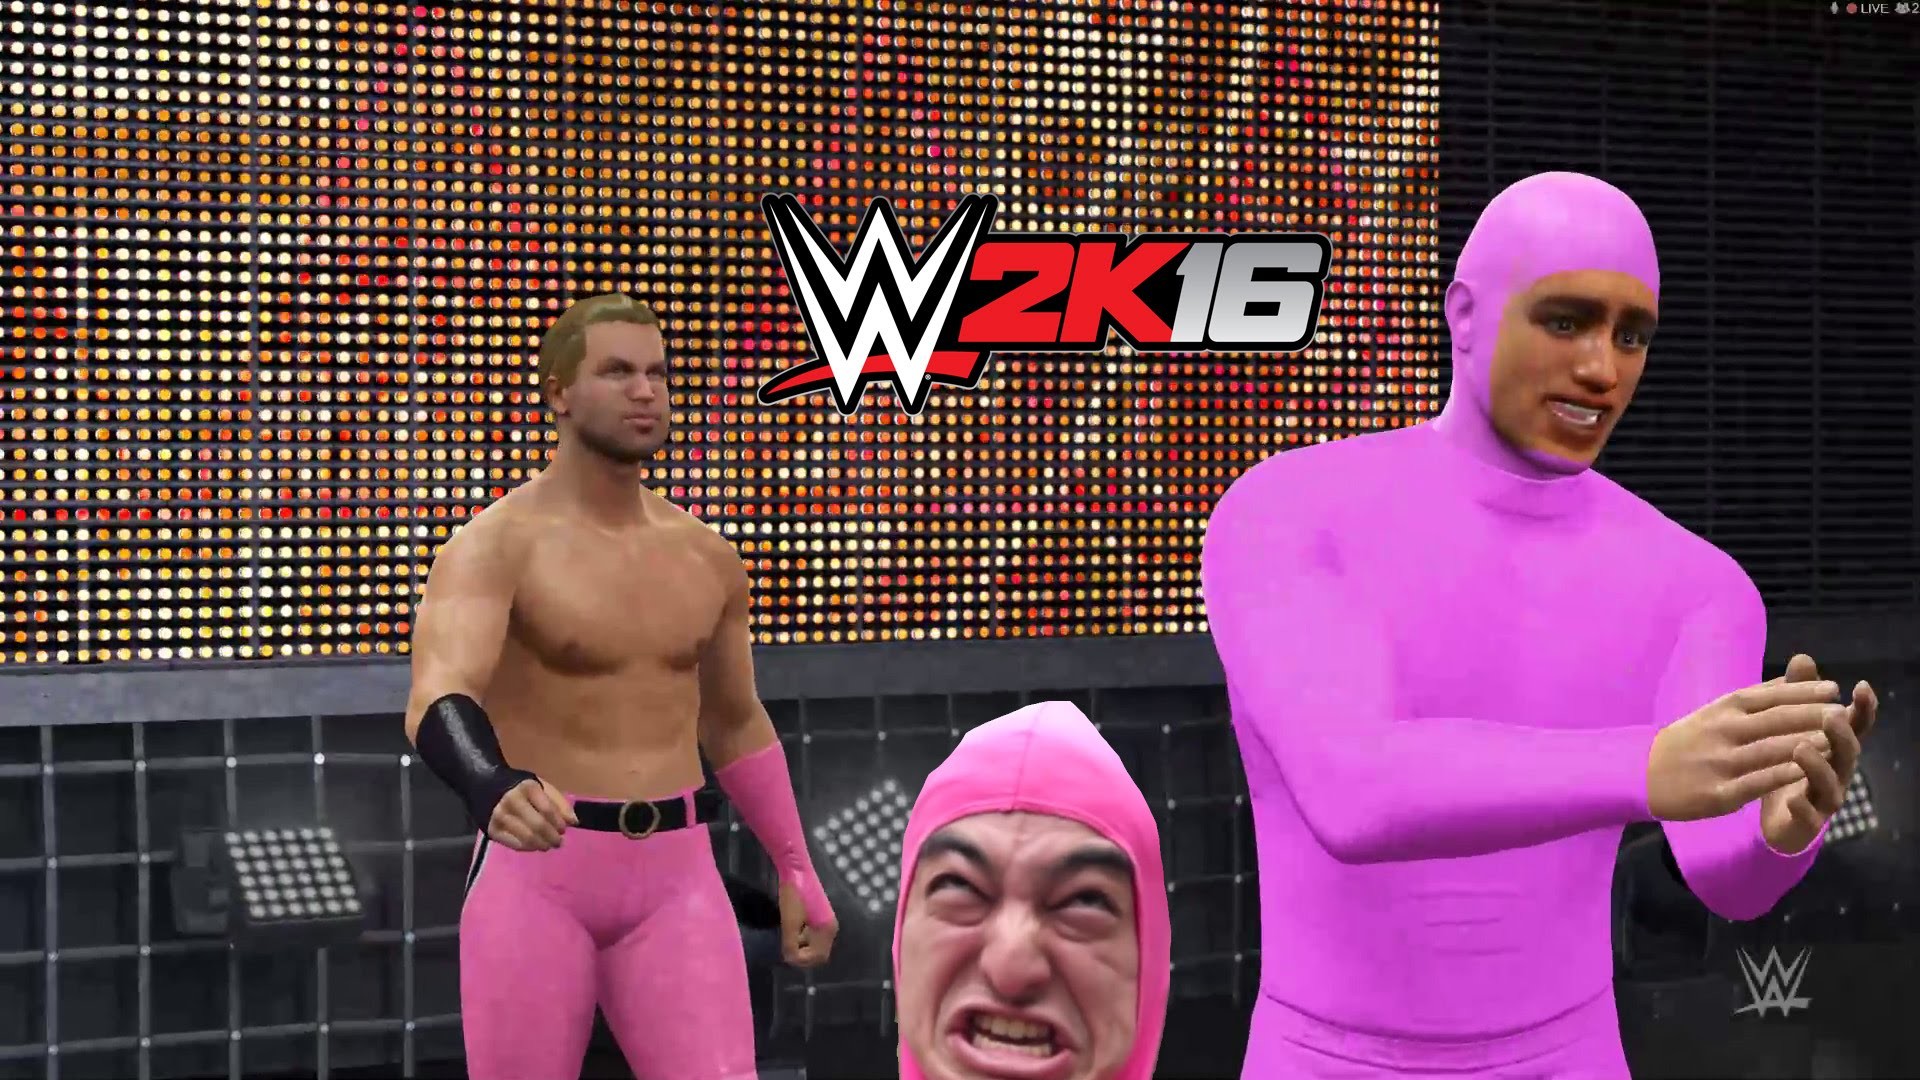 PINK GUY GETS ATTACKED WWE 2k16